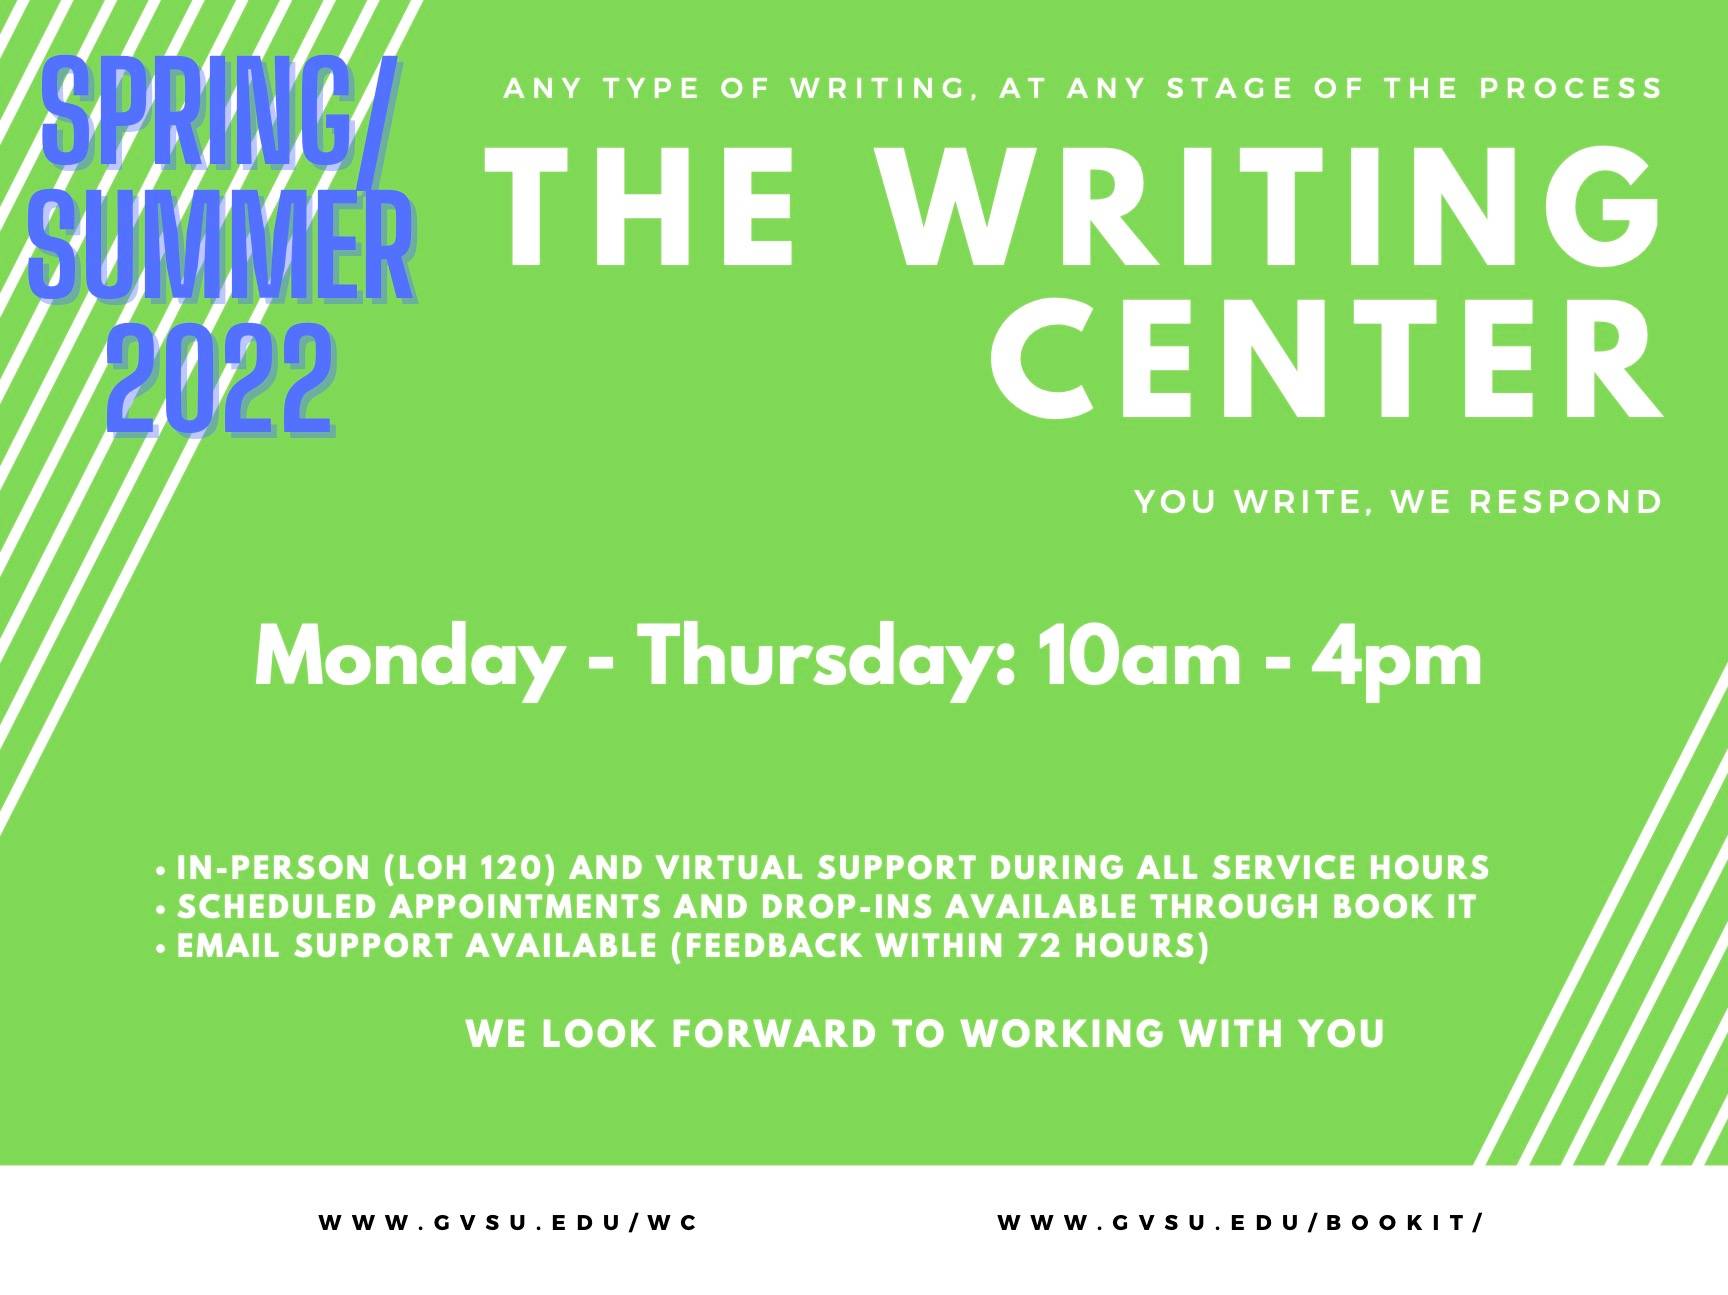 Spring/Summer writing center hours